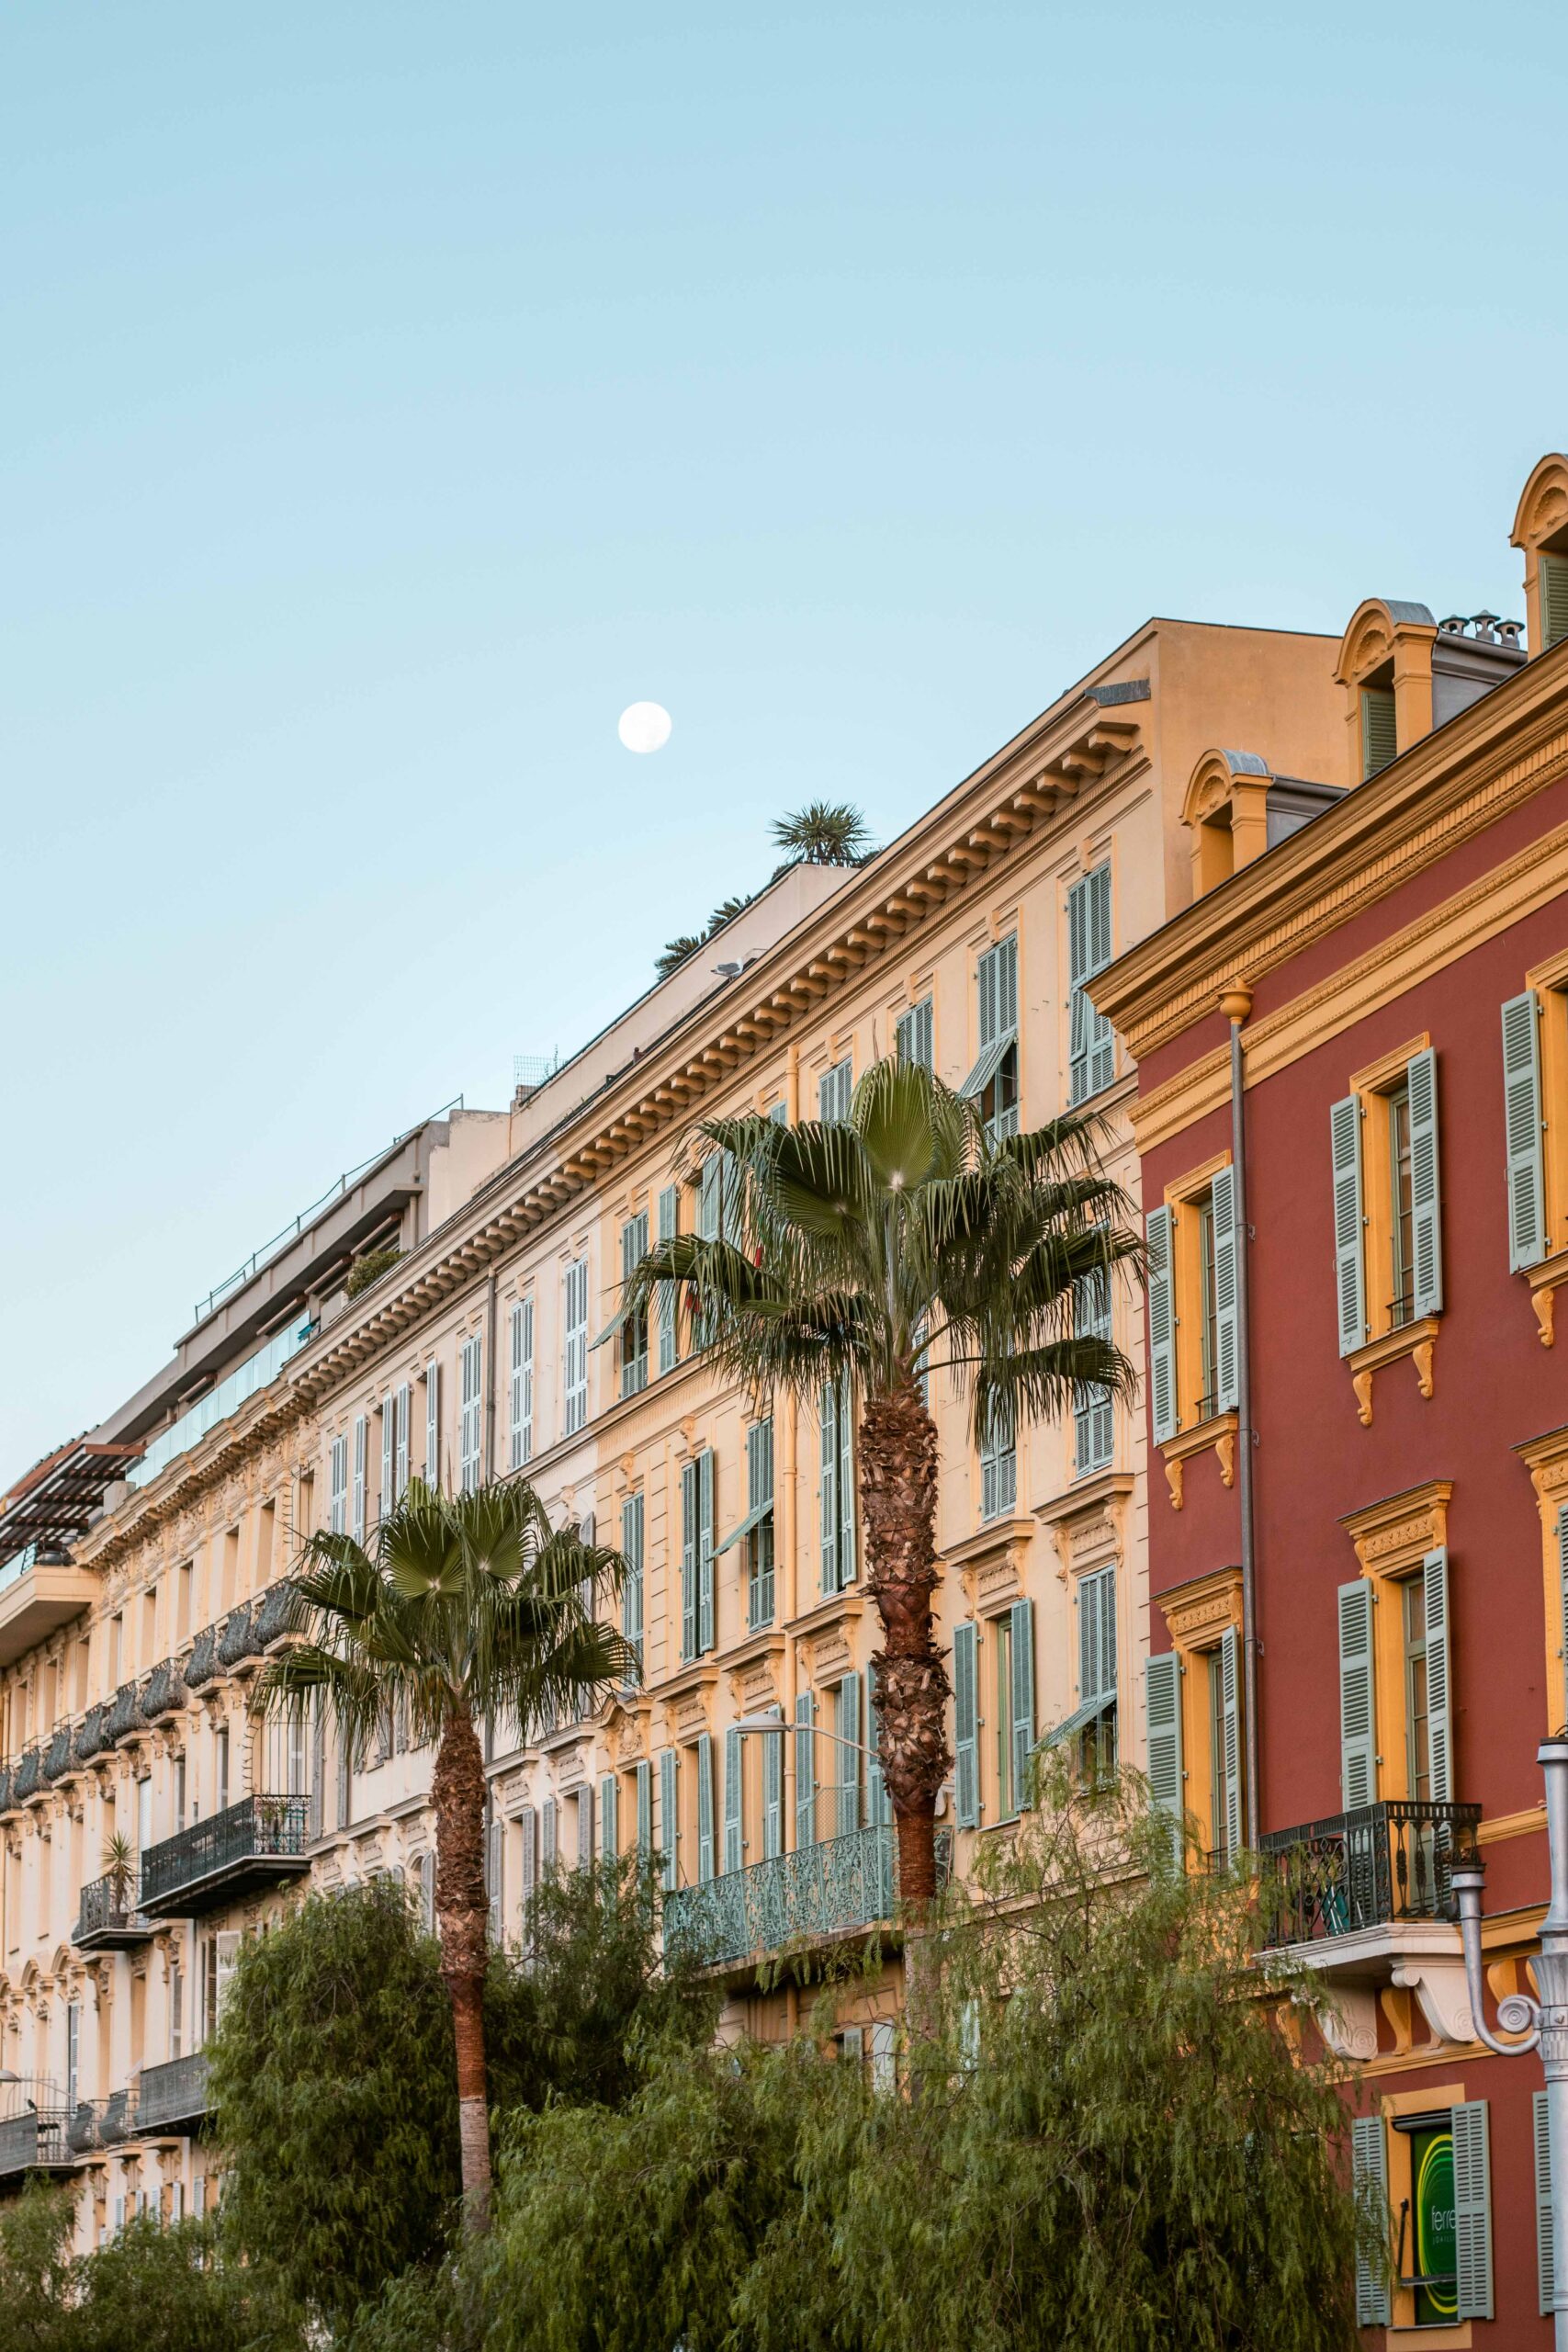 Facades of buildings and palmtrees around Place Masséna in Nice, France